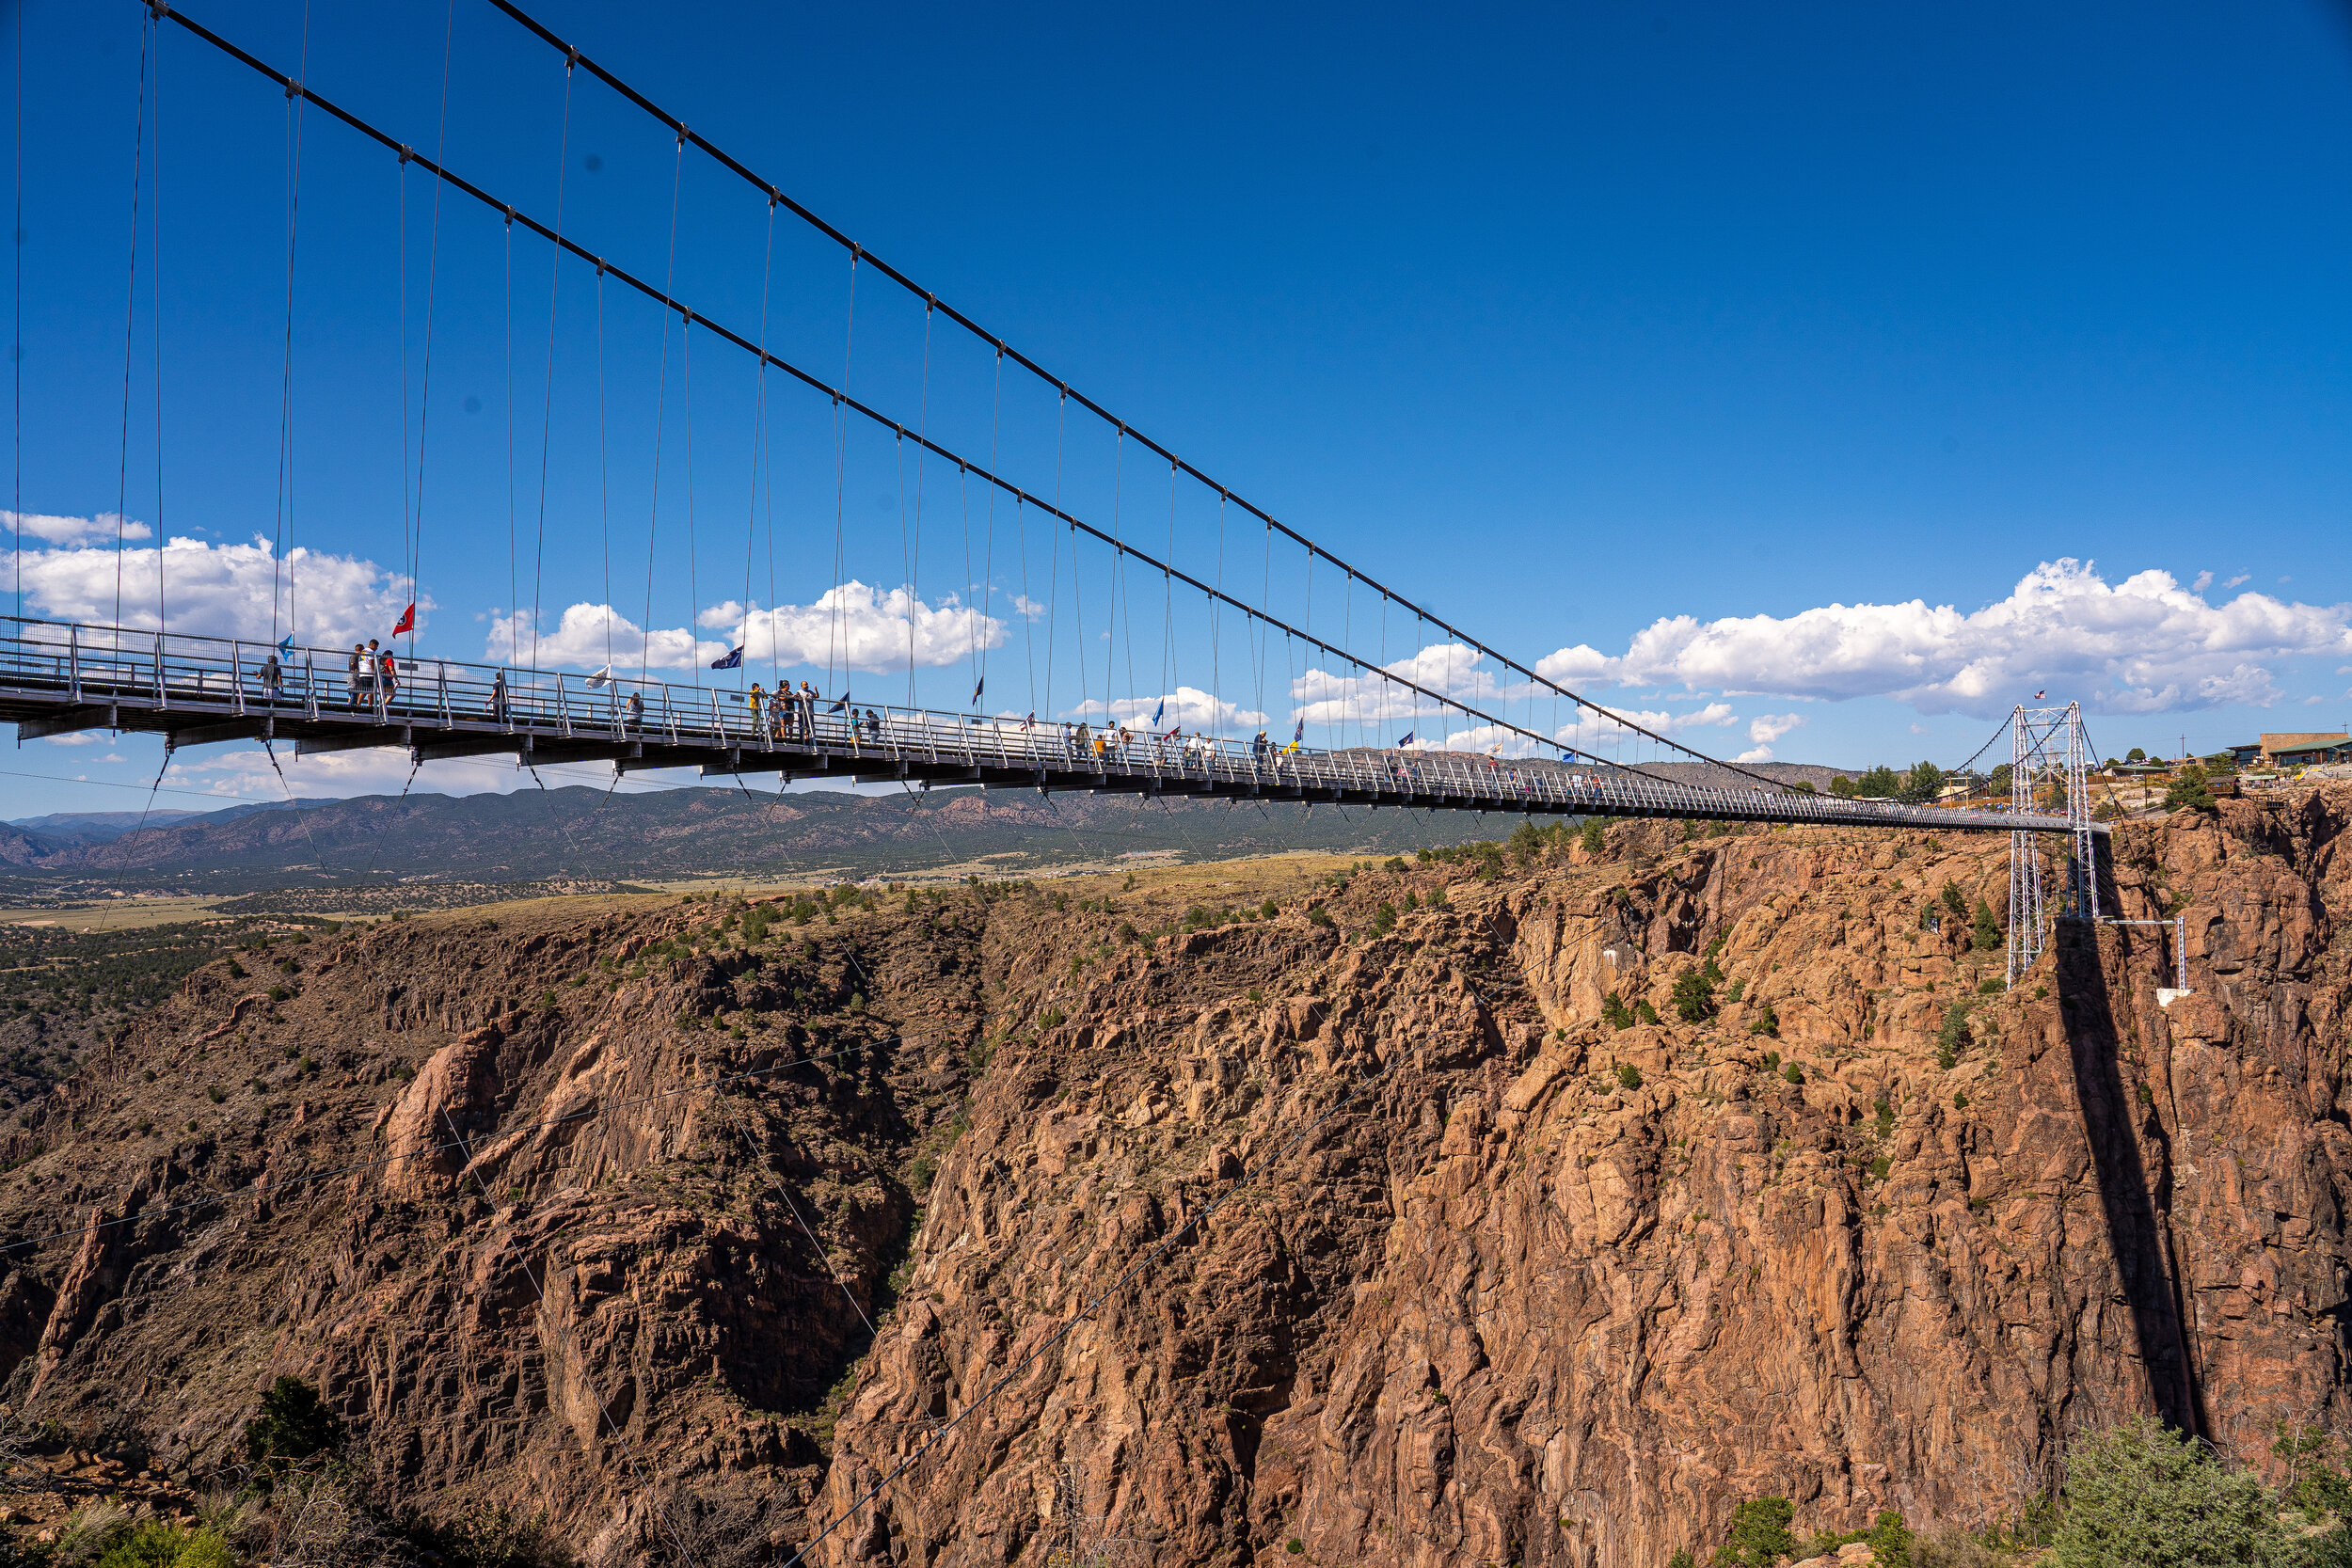   Royal Gorge Bridge and Park  in Cañon City is home to the highest suspension bridge in America. Built in 1929 by 80 men, in only 7 months, the bridge is a wonder in itself, in addition to towering nearly 1,000 feet over the Arkansas River.  